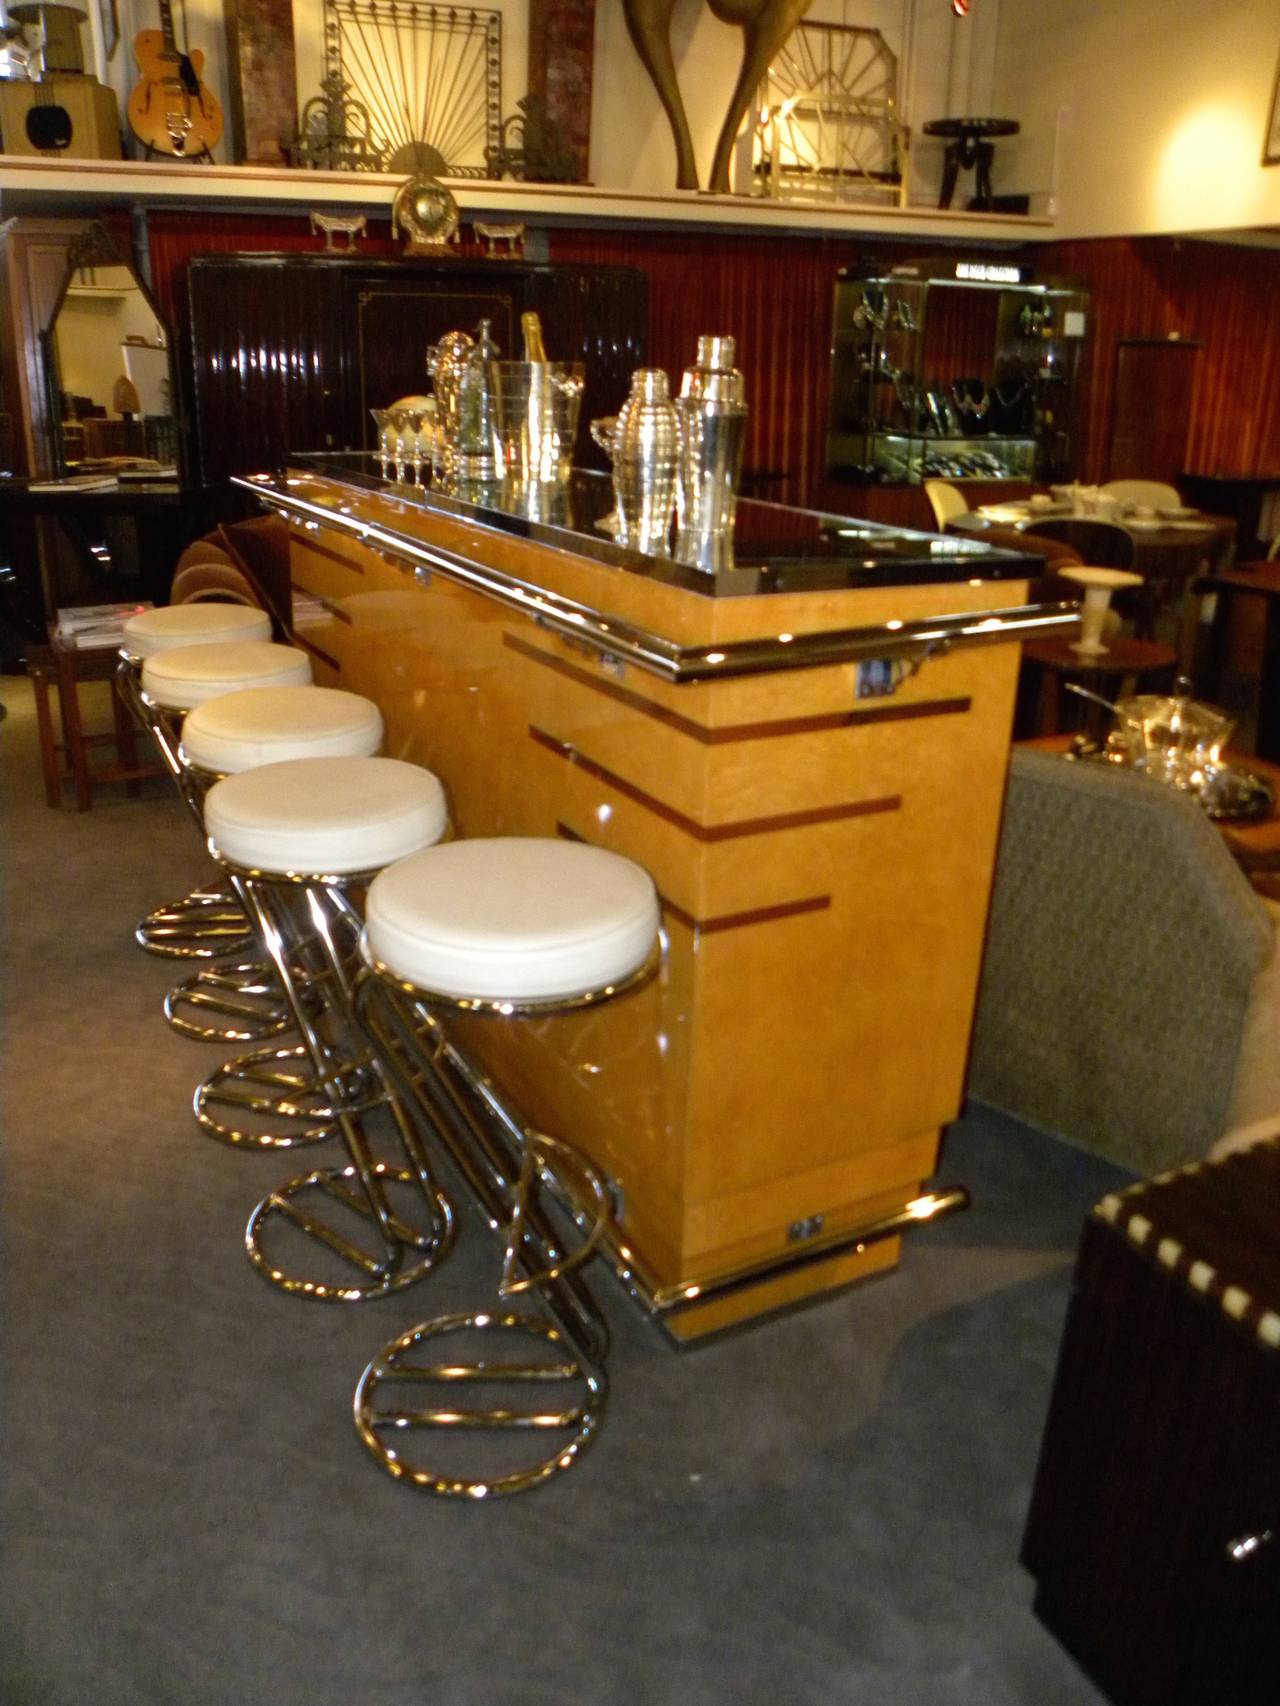 This Parisian Art Deco Bar is sleek, gleaming and perfect!  From the mirrored bar-top, to the highly polished butterscotch colored wood veneer, to the shiny chrome railings, kick plate and barstools.  Everything about this wide and wonderful stand